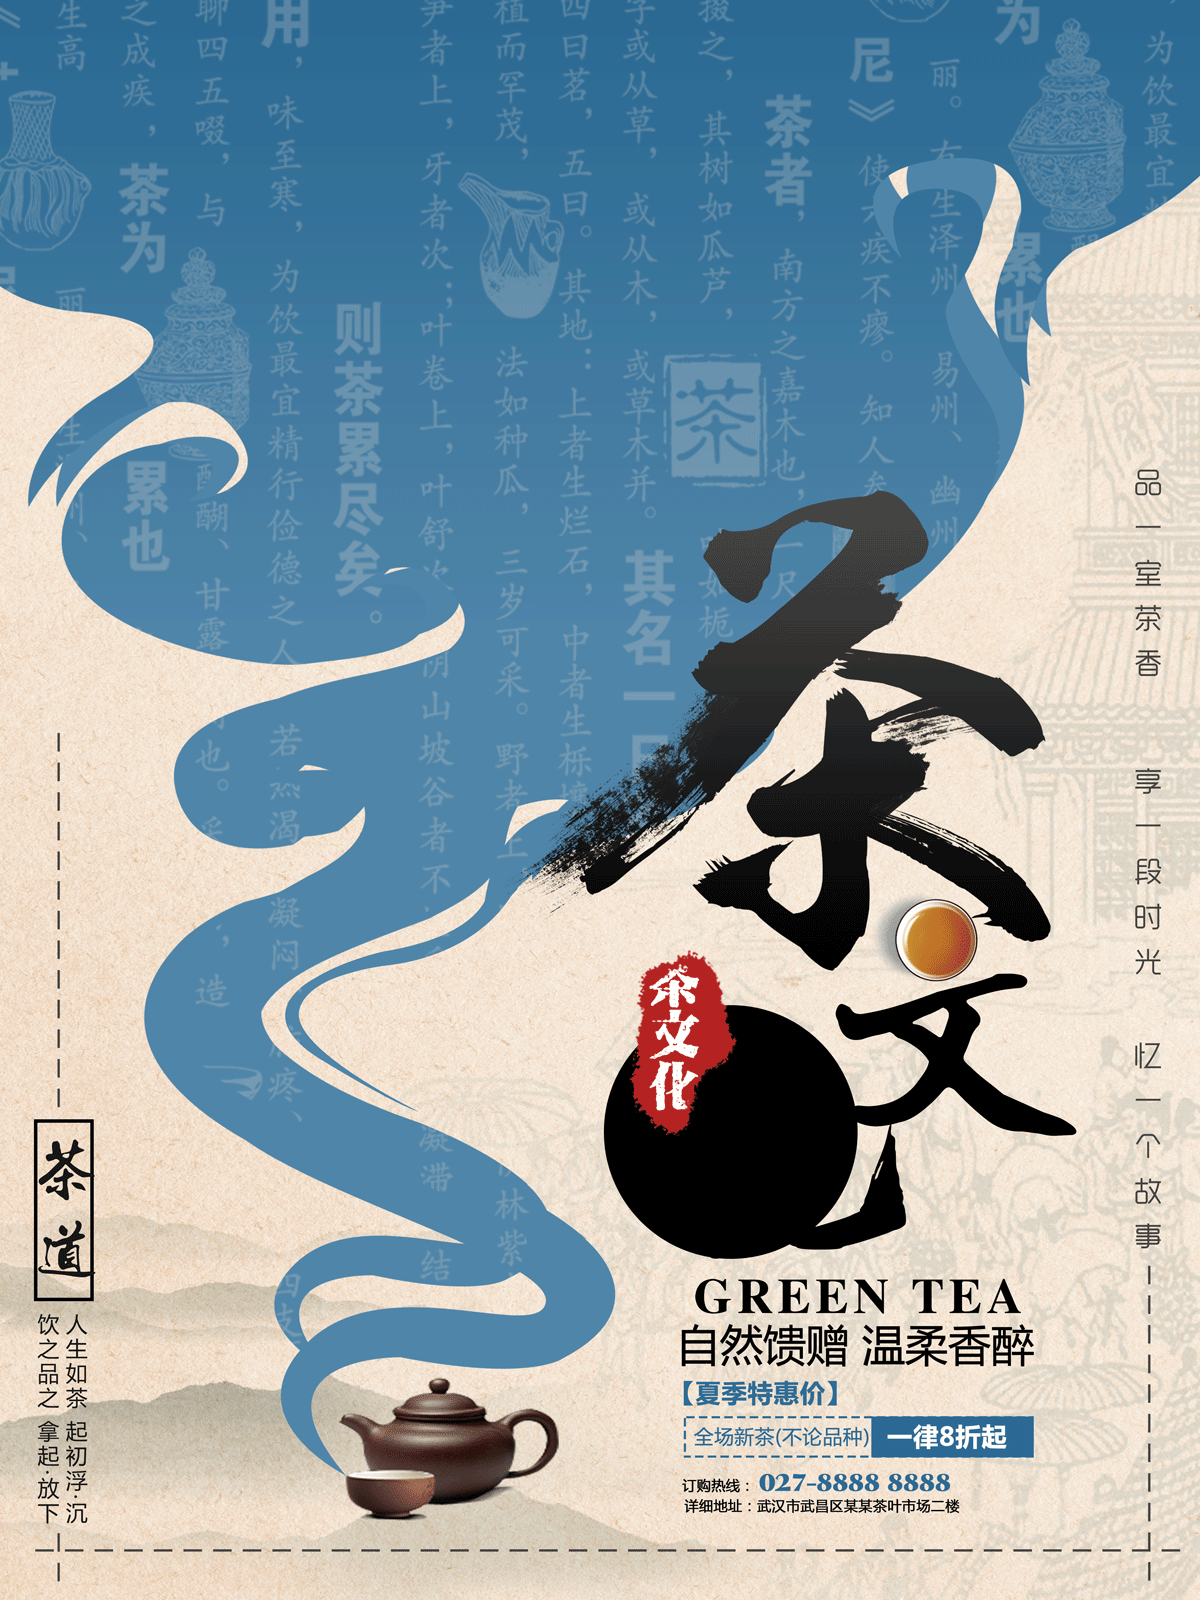 Chinese tea culture poster style - PSD File Free Download